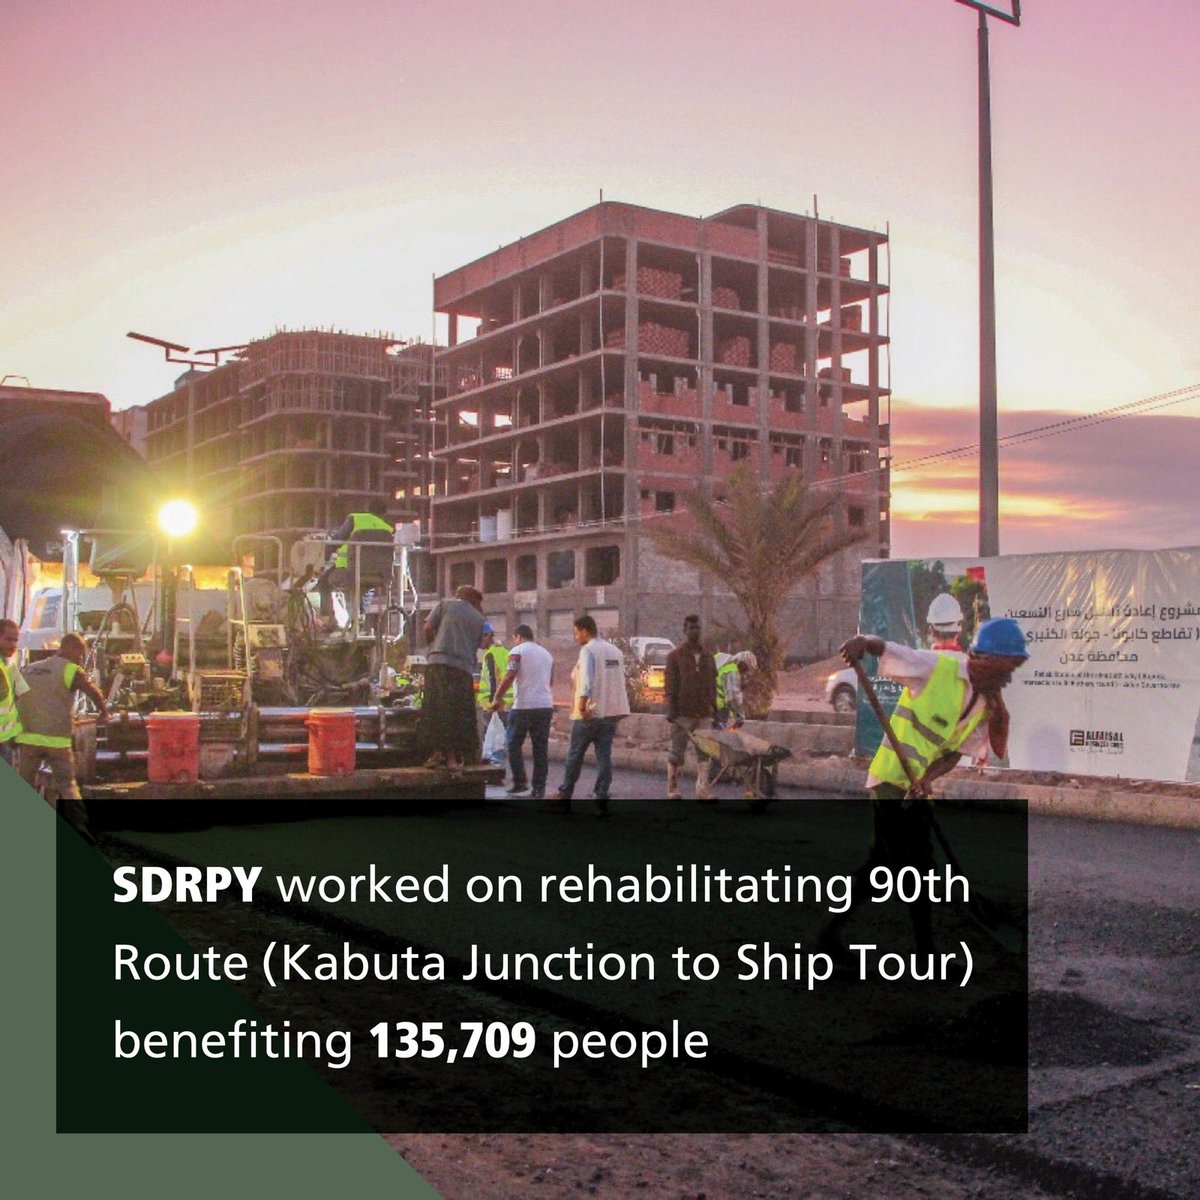 #SDRPY worked on rehabilitating 90th
Route (Kabuta Junction to Ship Tour)
benefiting 135,709 people
#Yemen